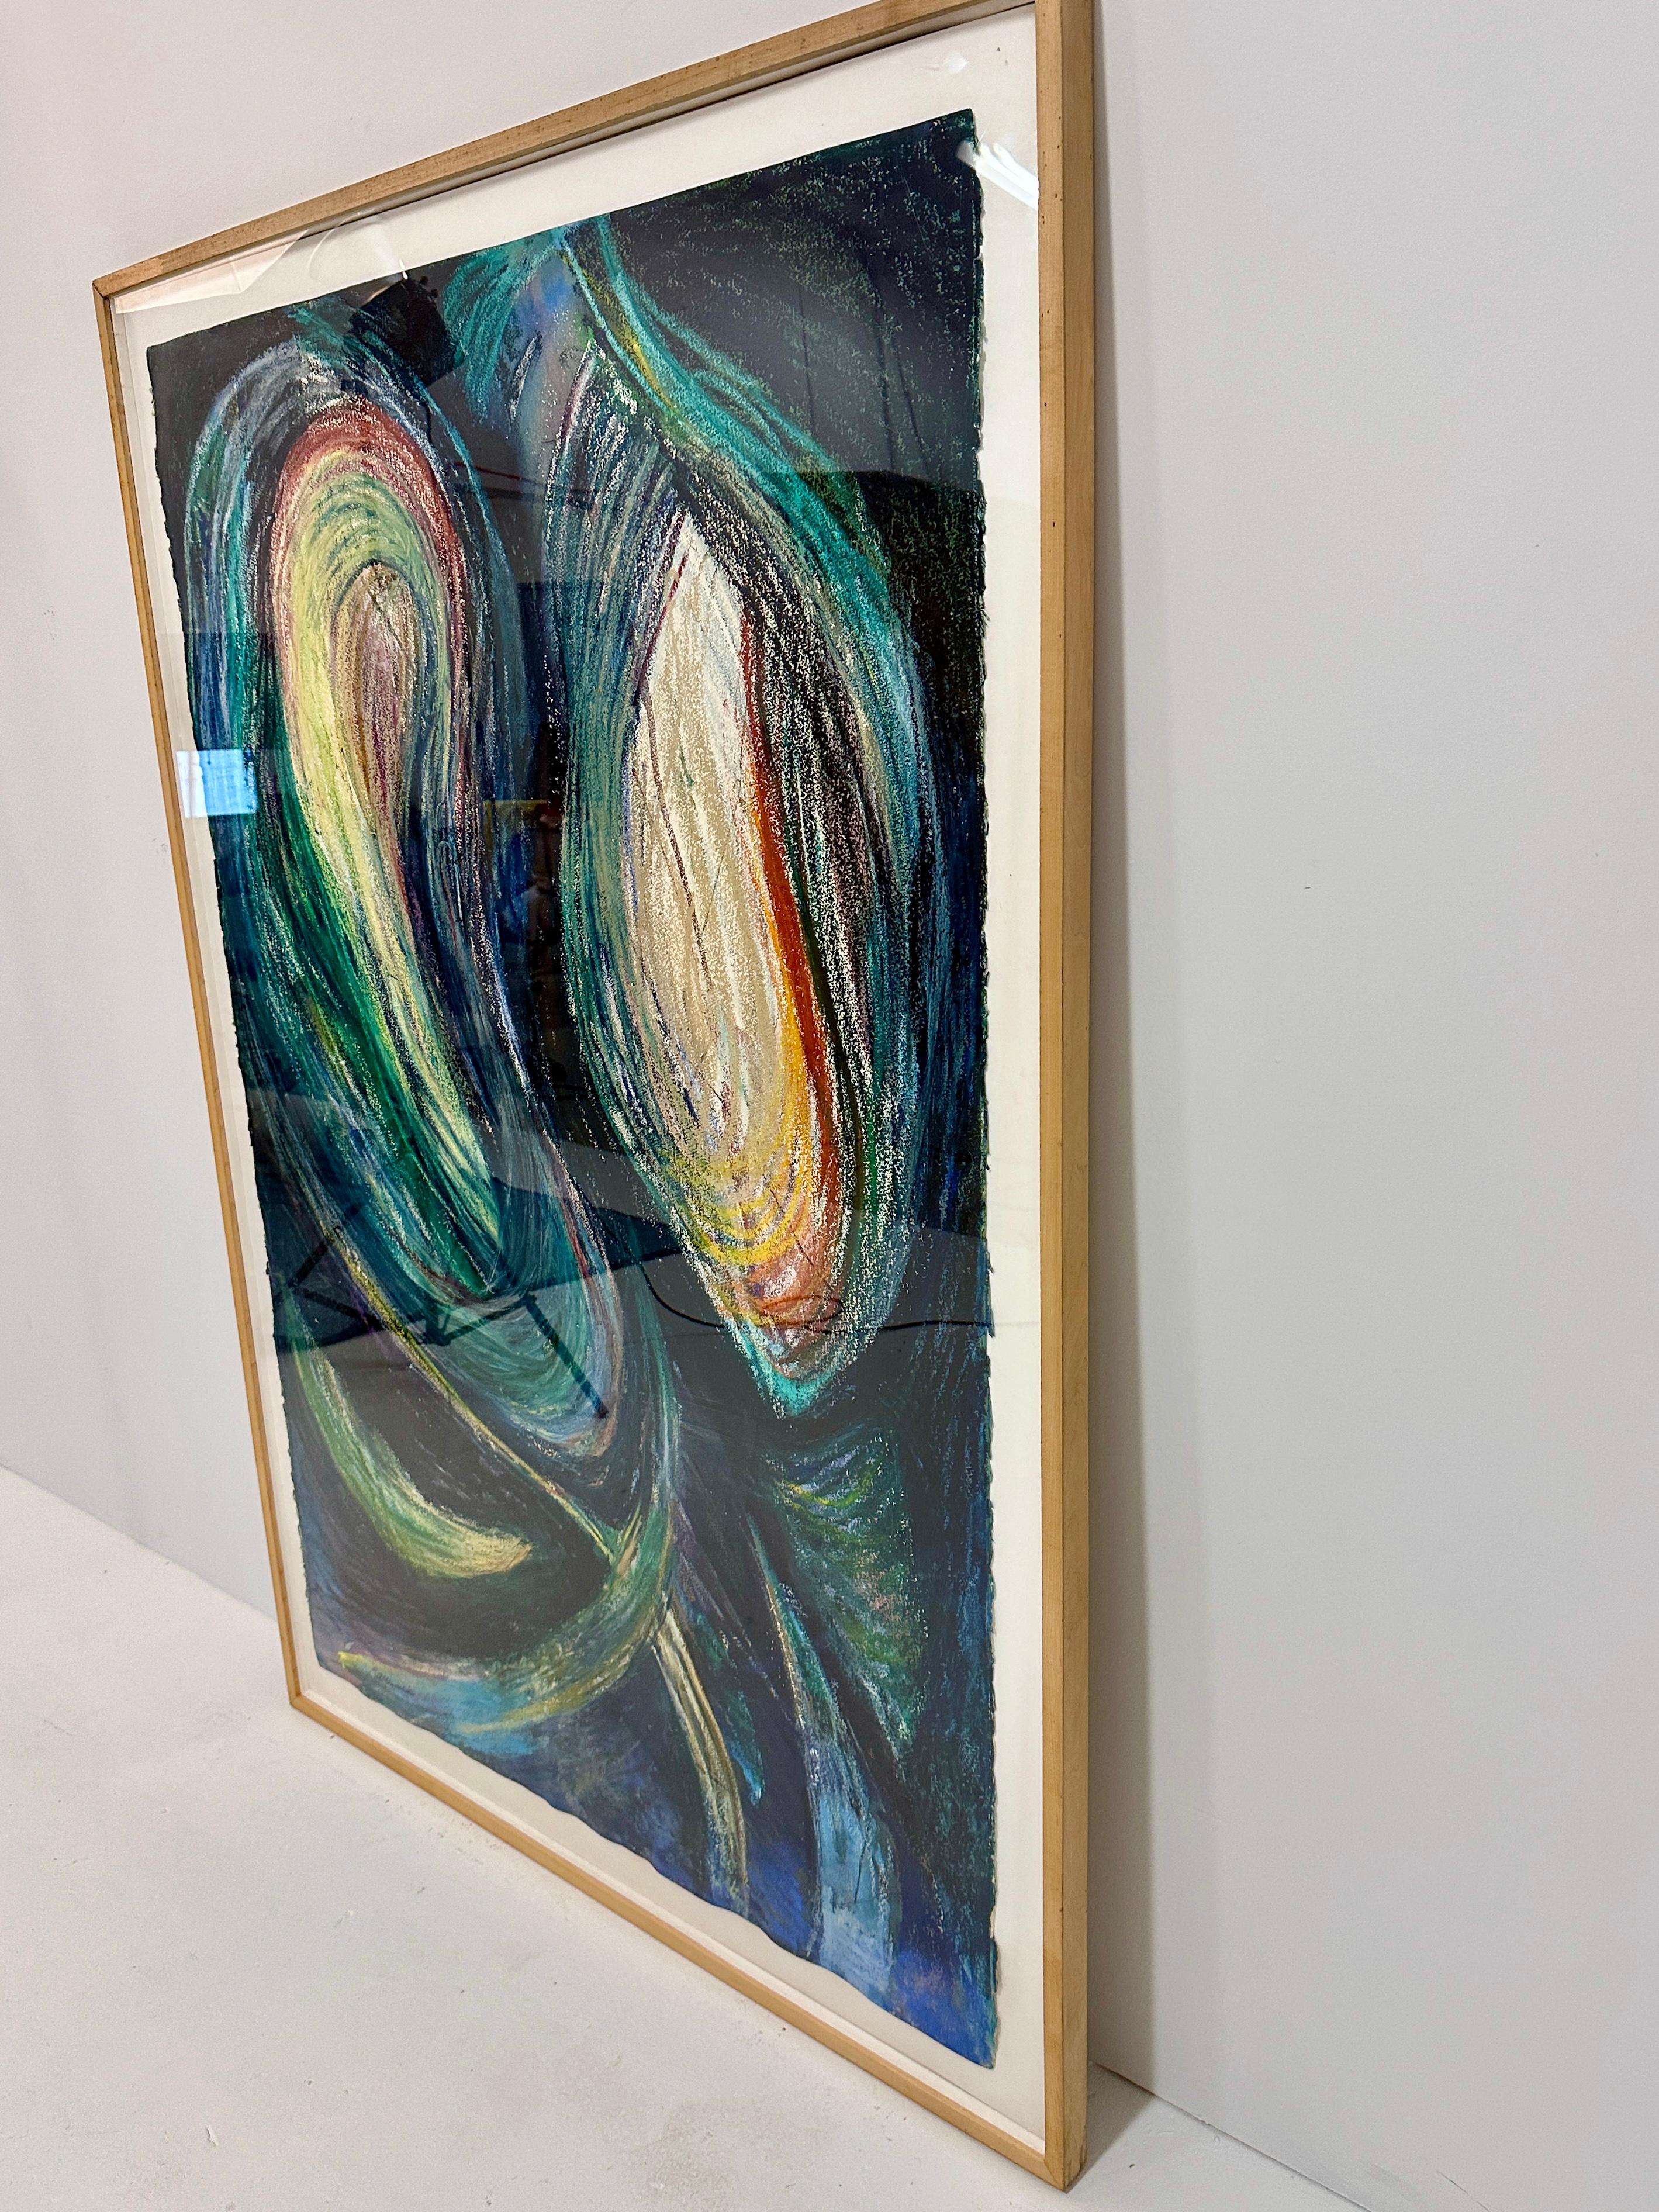 This large works by Bernice Alpert Winick is acrylic on paper shown in its original frame. Great size: framed dimension 65.25